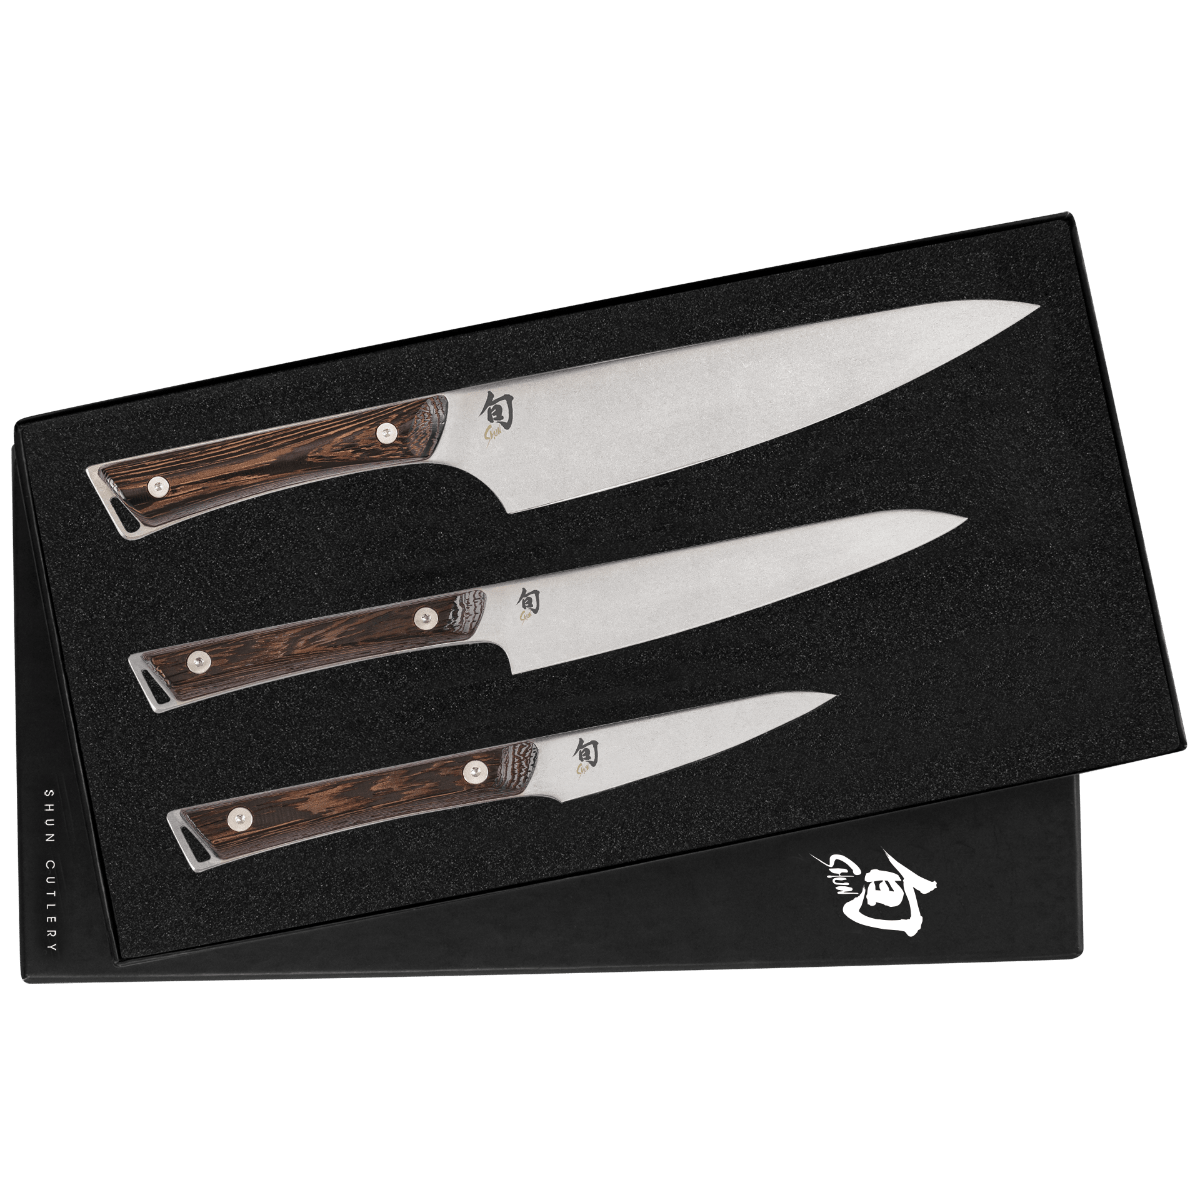  Shun Cutlery Classic Combination Honing Steel 9, Gently  Corrects Rolled Knife Edges, Smooth & Micro-Ribbed Honing Rod, Built-In  Angle Guide, Professional Japanese Honing Steel : Tools & Home Improvement